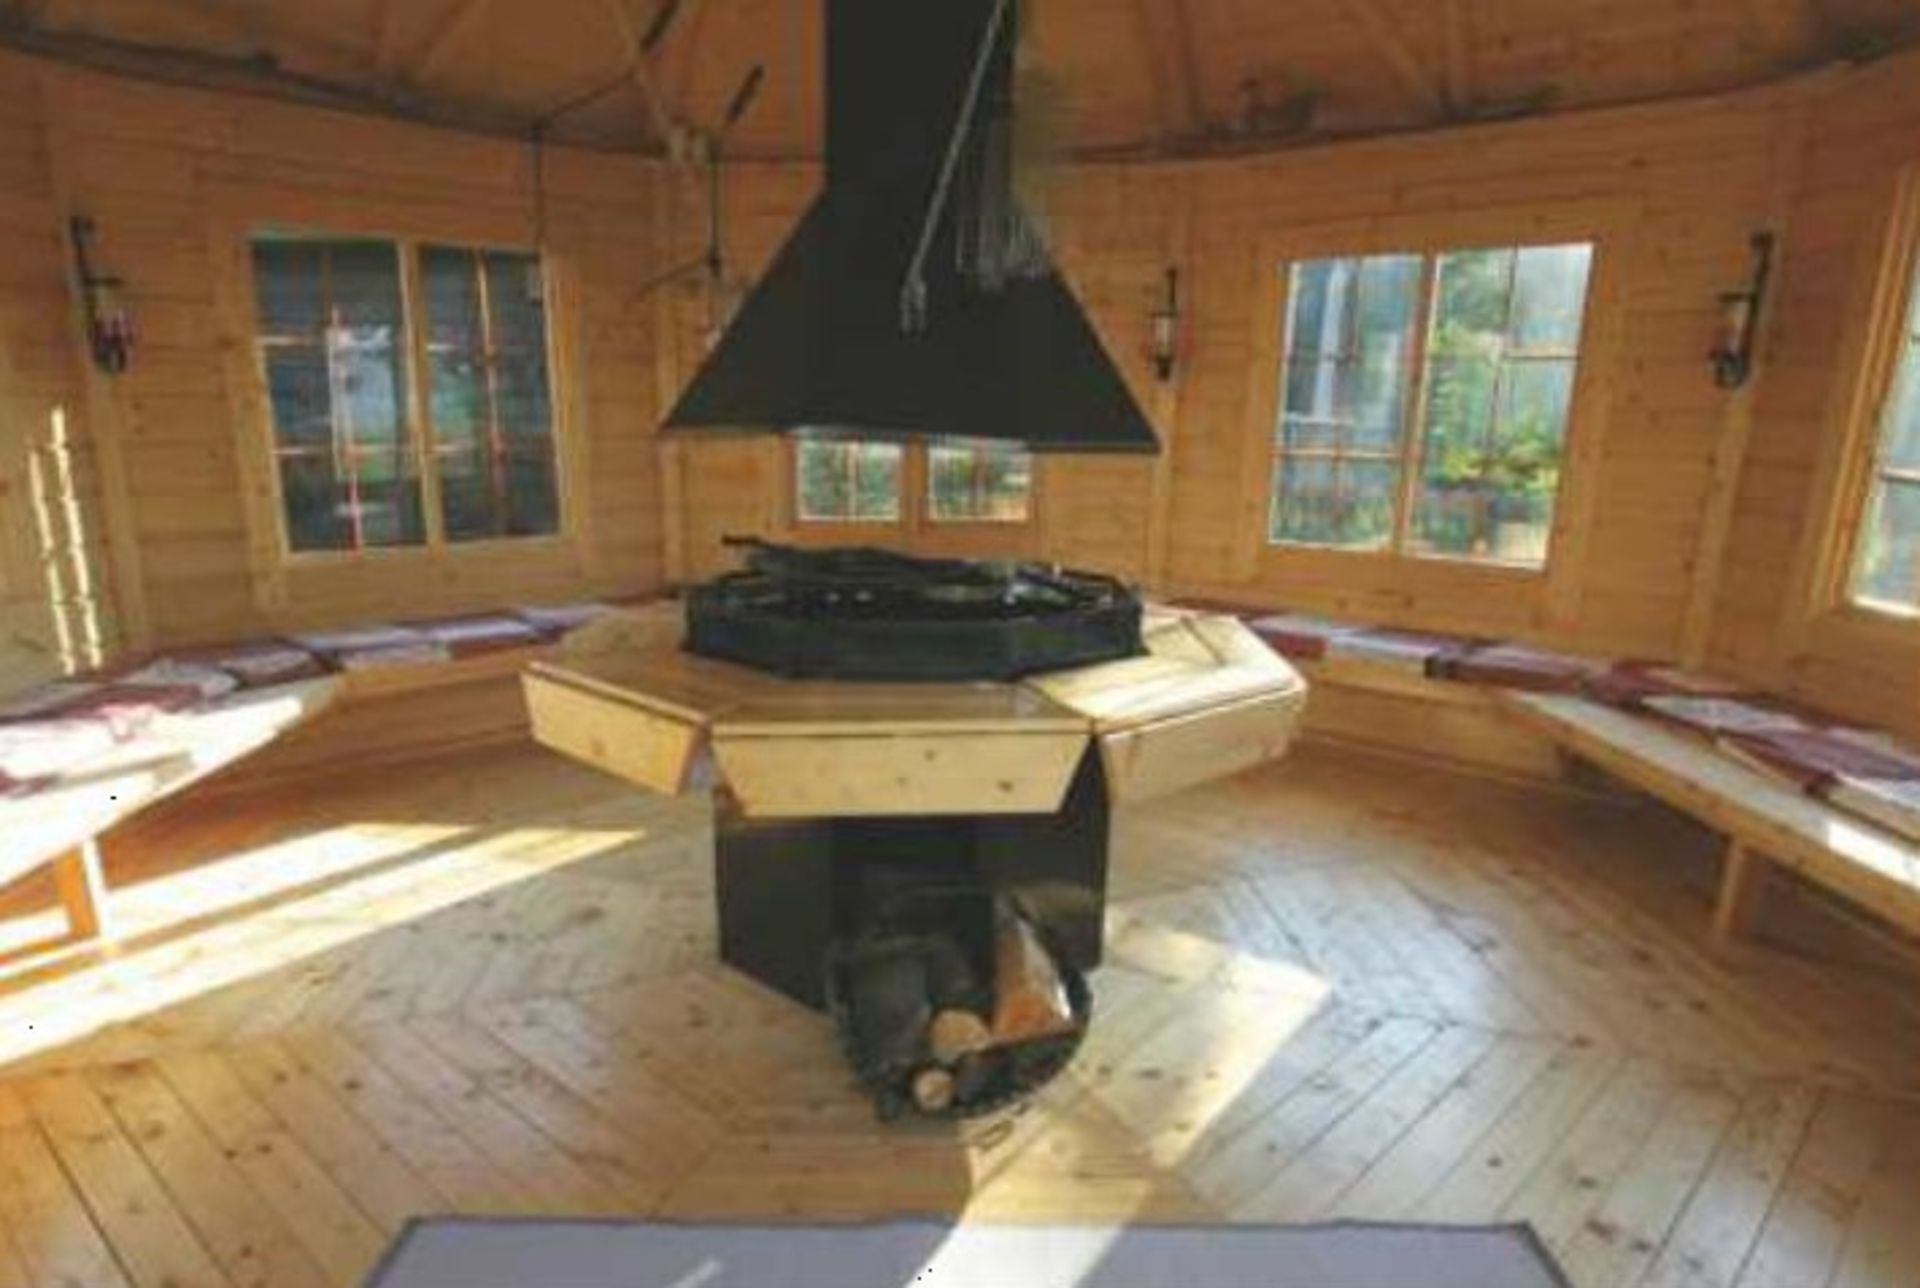 V Brand New 16.5m sq 8 Corner Spruce Pavilion - Grill With Cooking platforms and table around the - Image 2 of 3